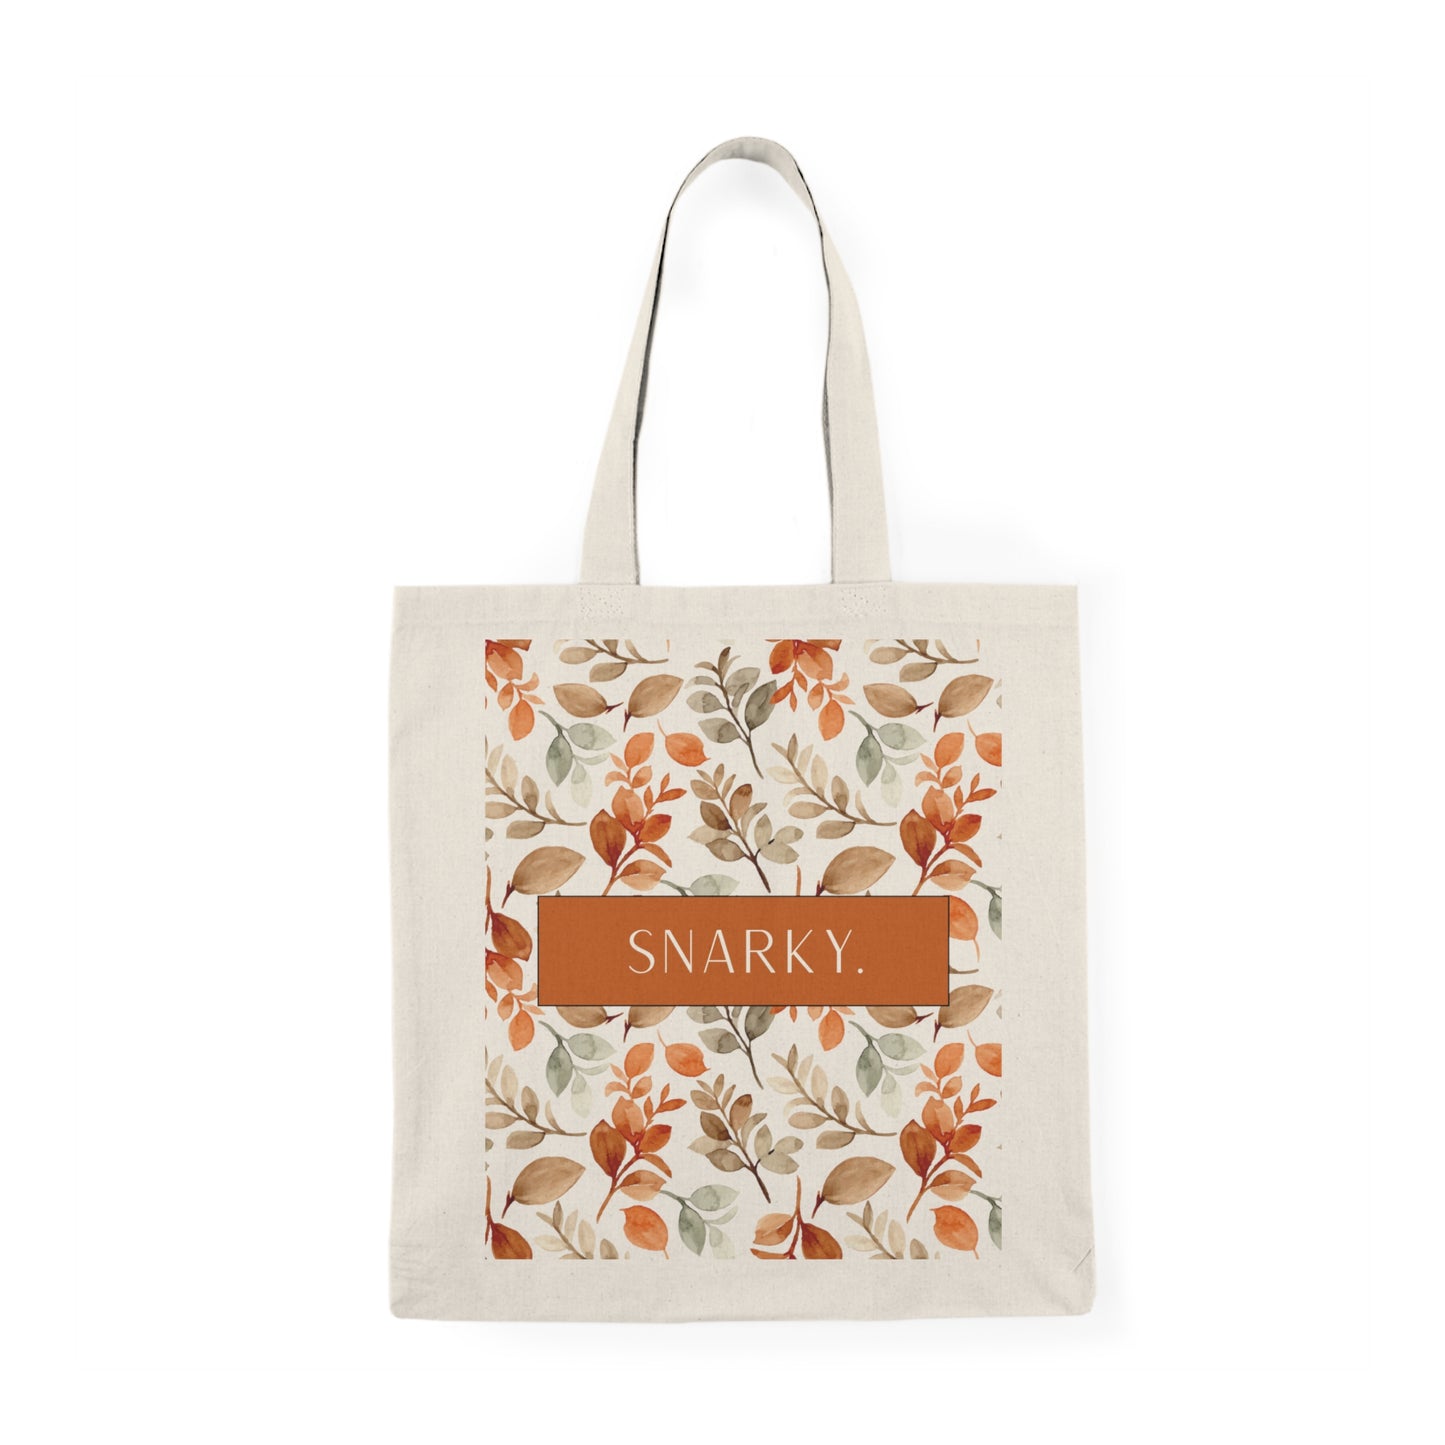 "Snarky" Tote